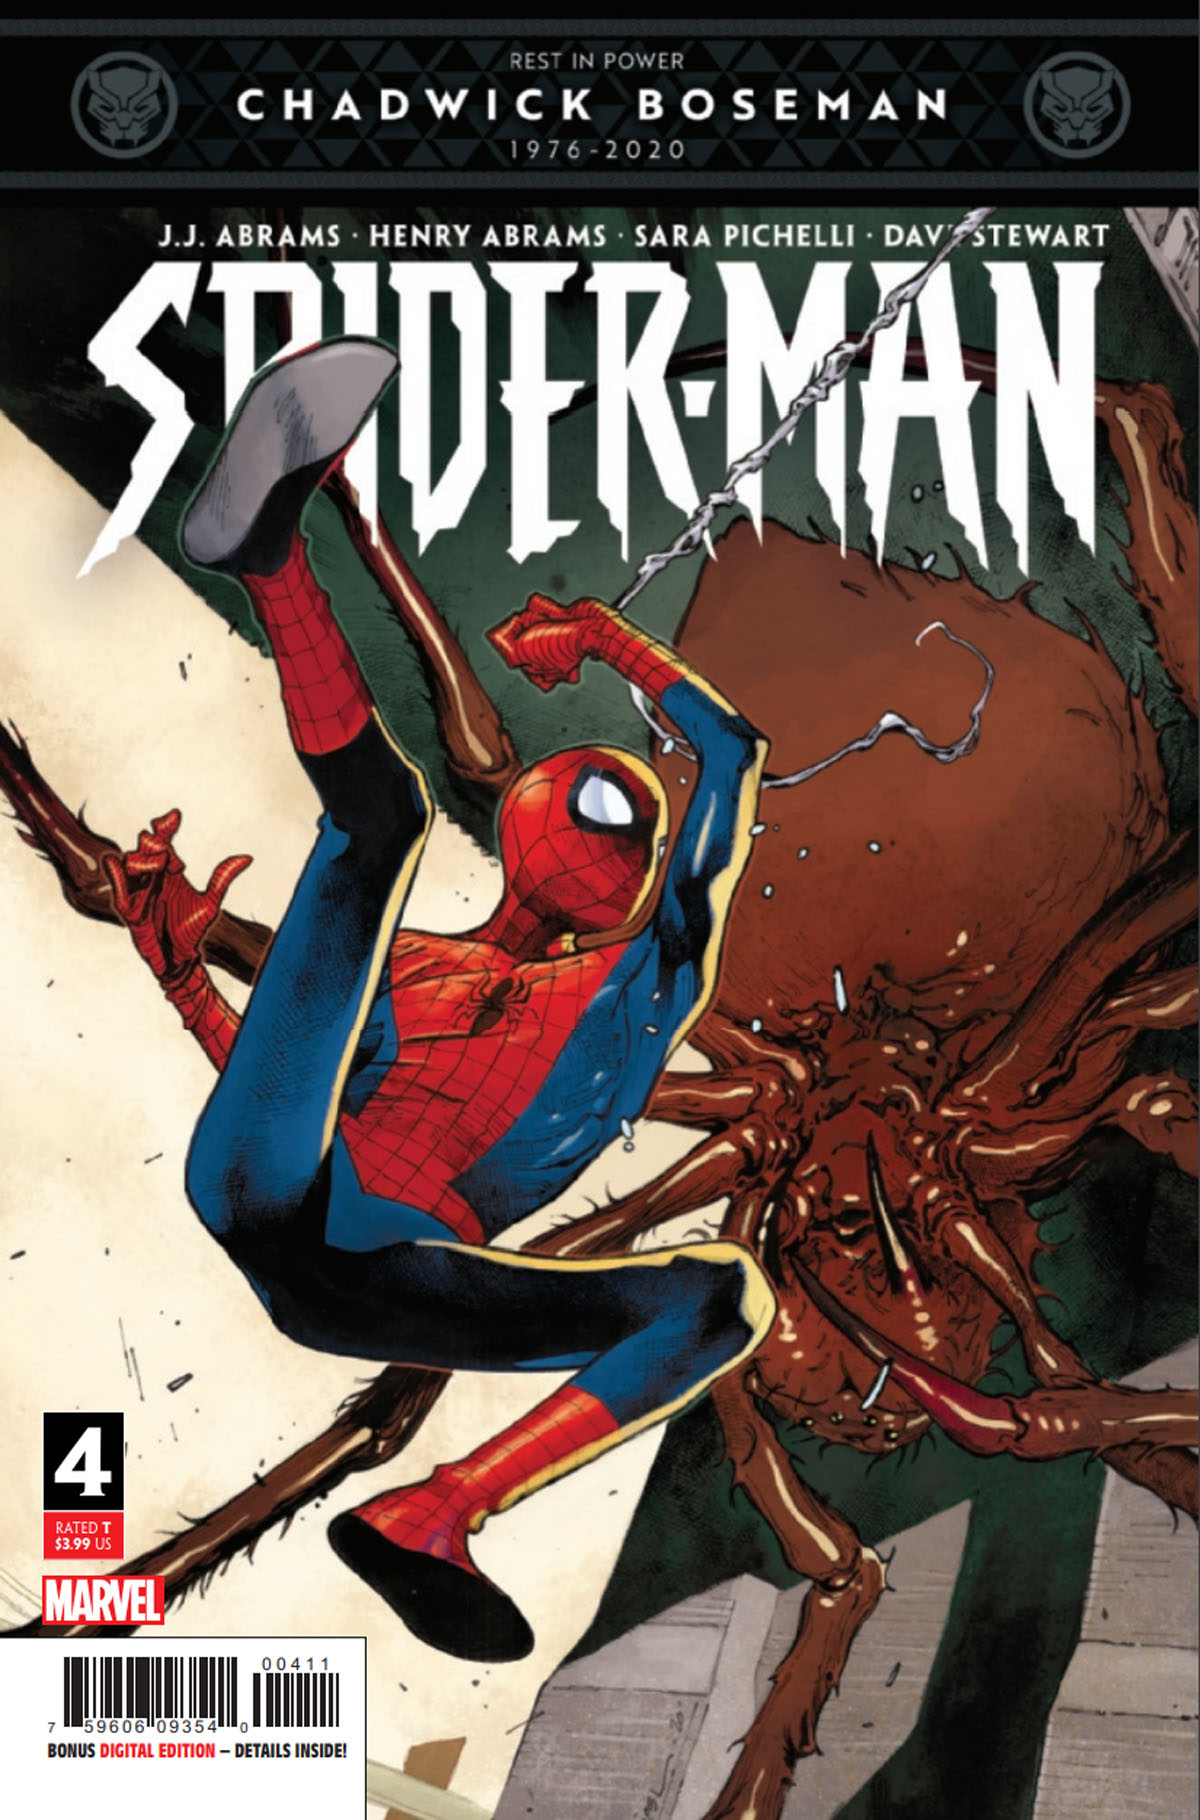 Spider-Man #4 cover